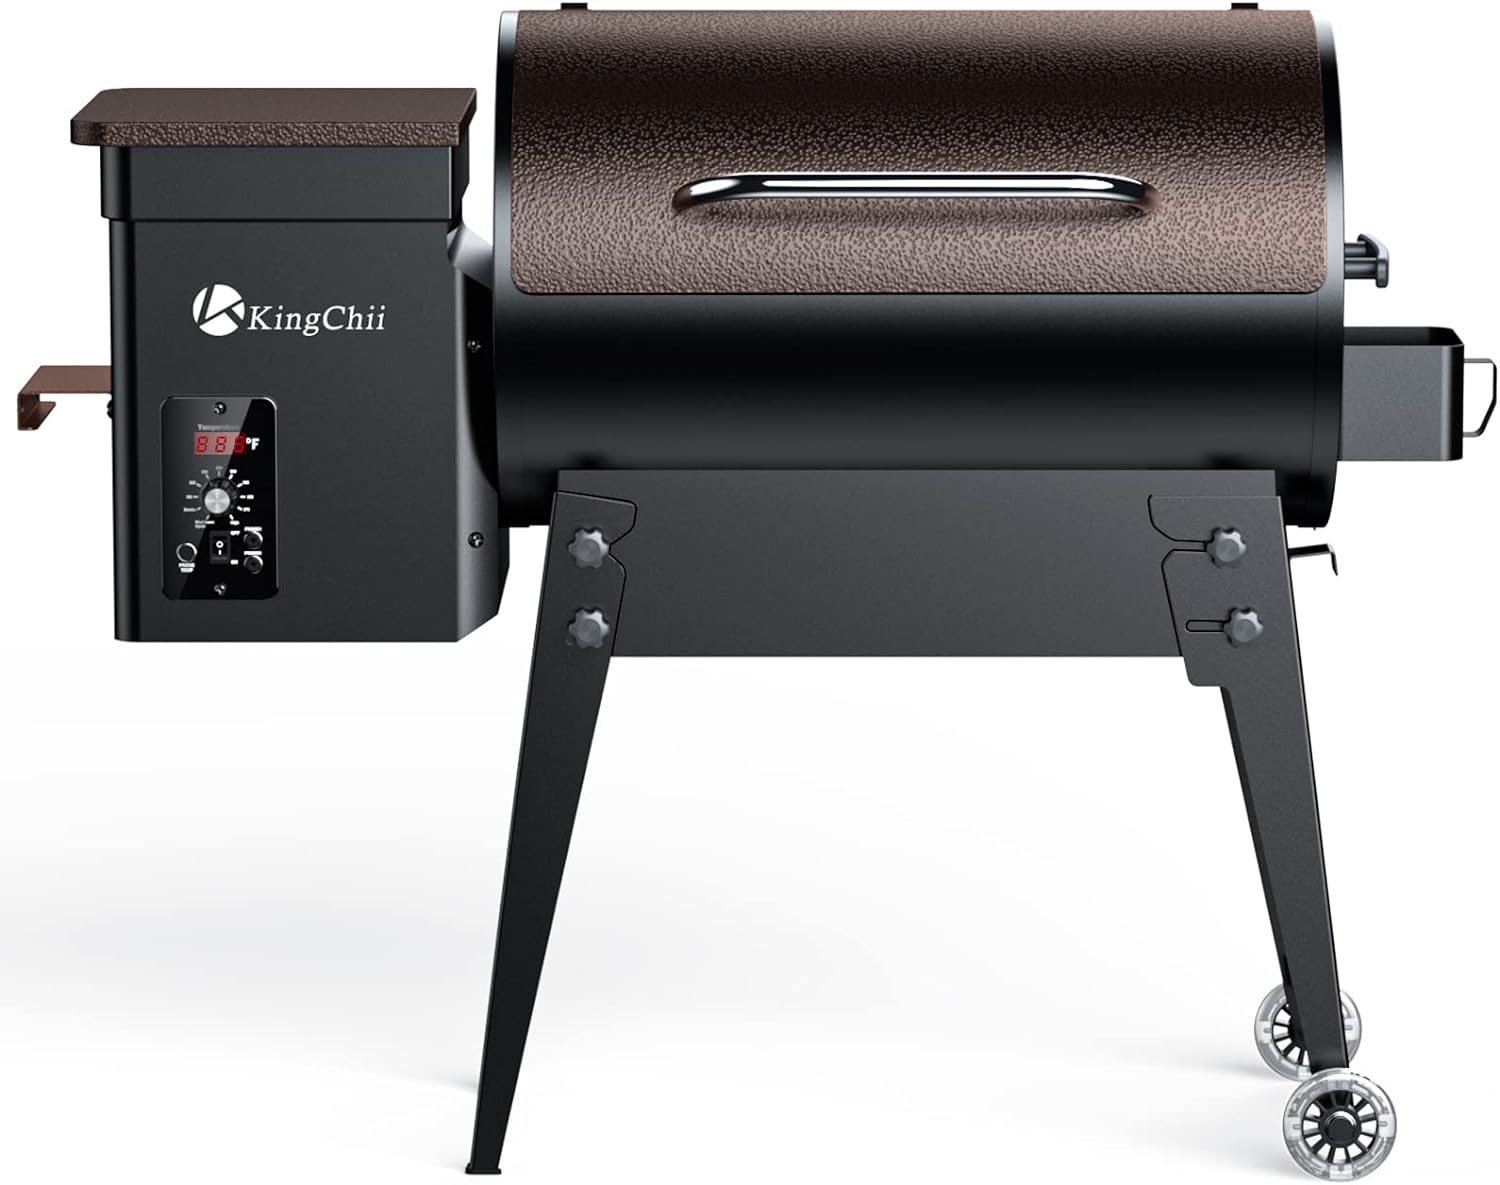 KingChii 456 SQ.IN Pellet Grill Smoker with Side Shelf, 8 IN 1 BBQ Grill with PID Temperature Control for Outdoor Cooking, BBQ Camping and Patio, Brown